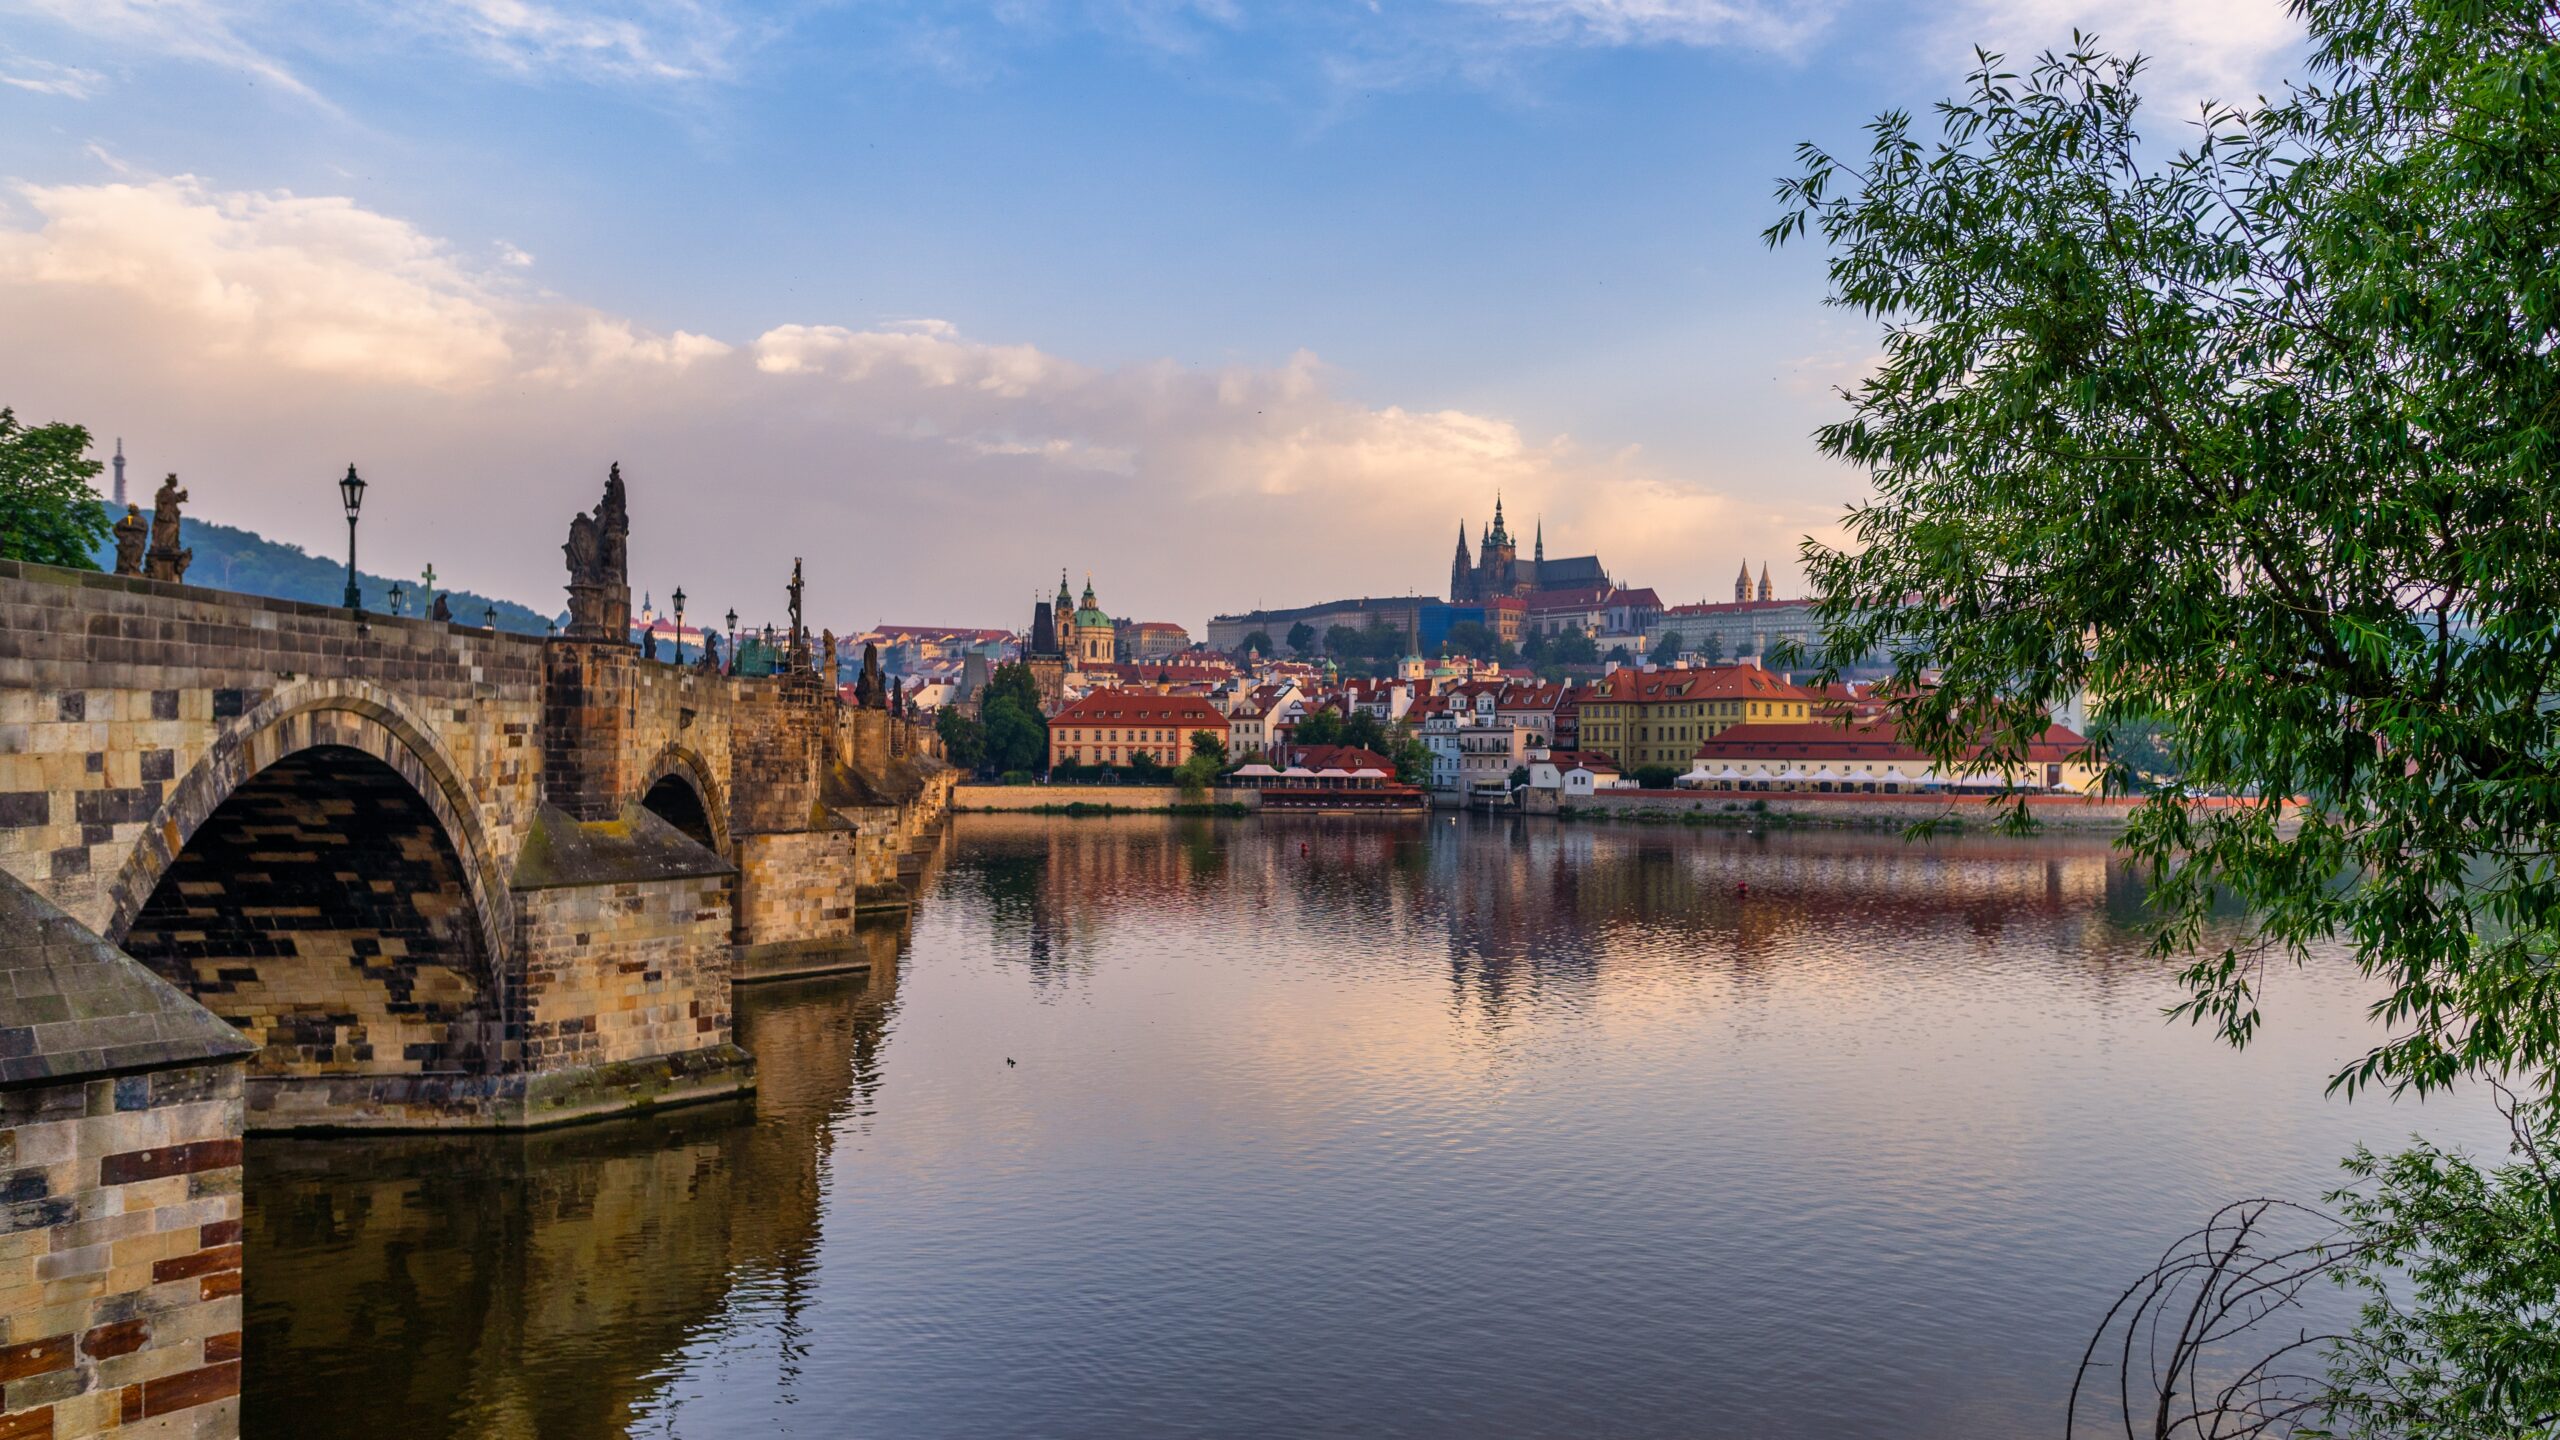 Looking across the river, the skyline of Prague in the magic hour.